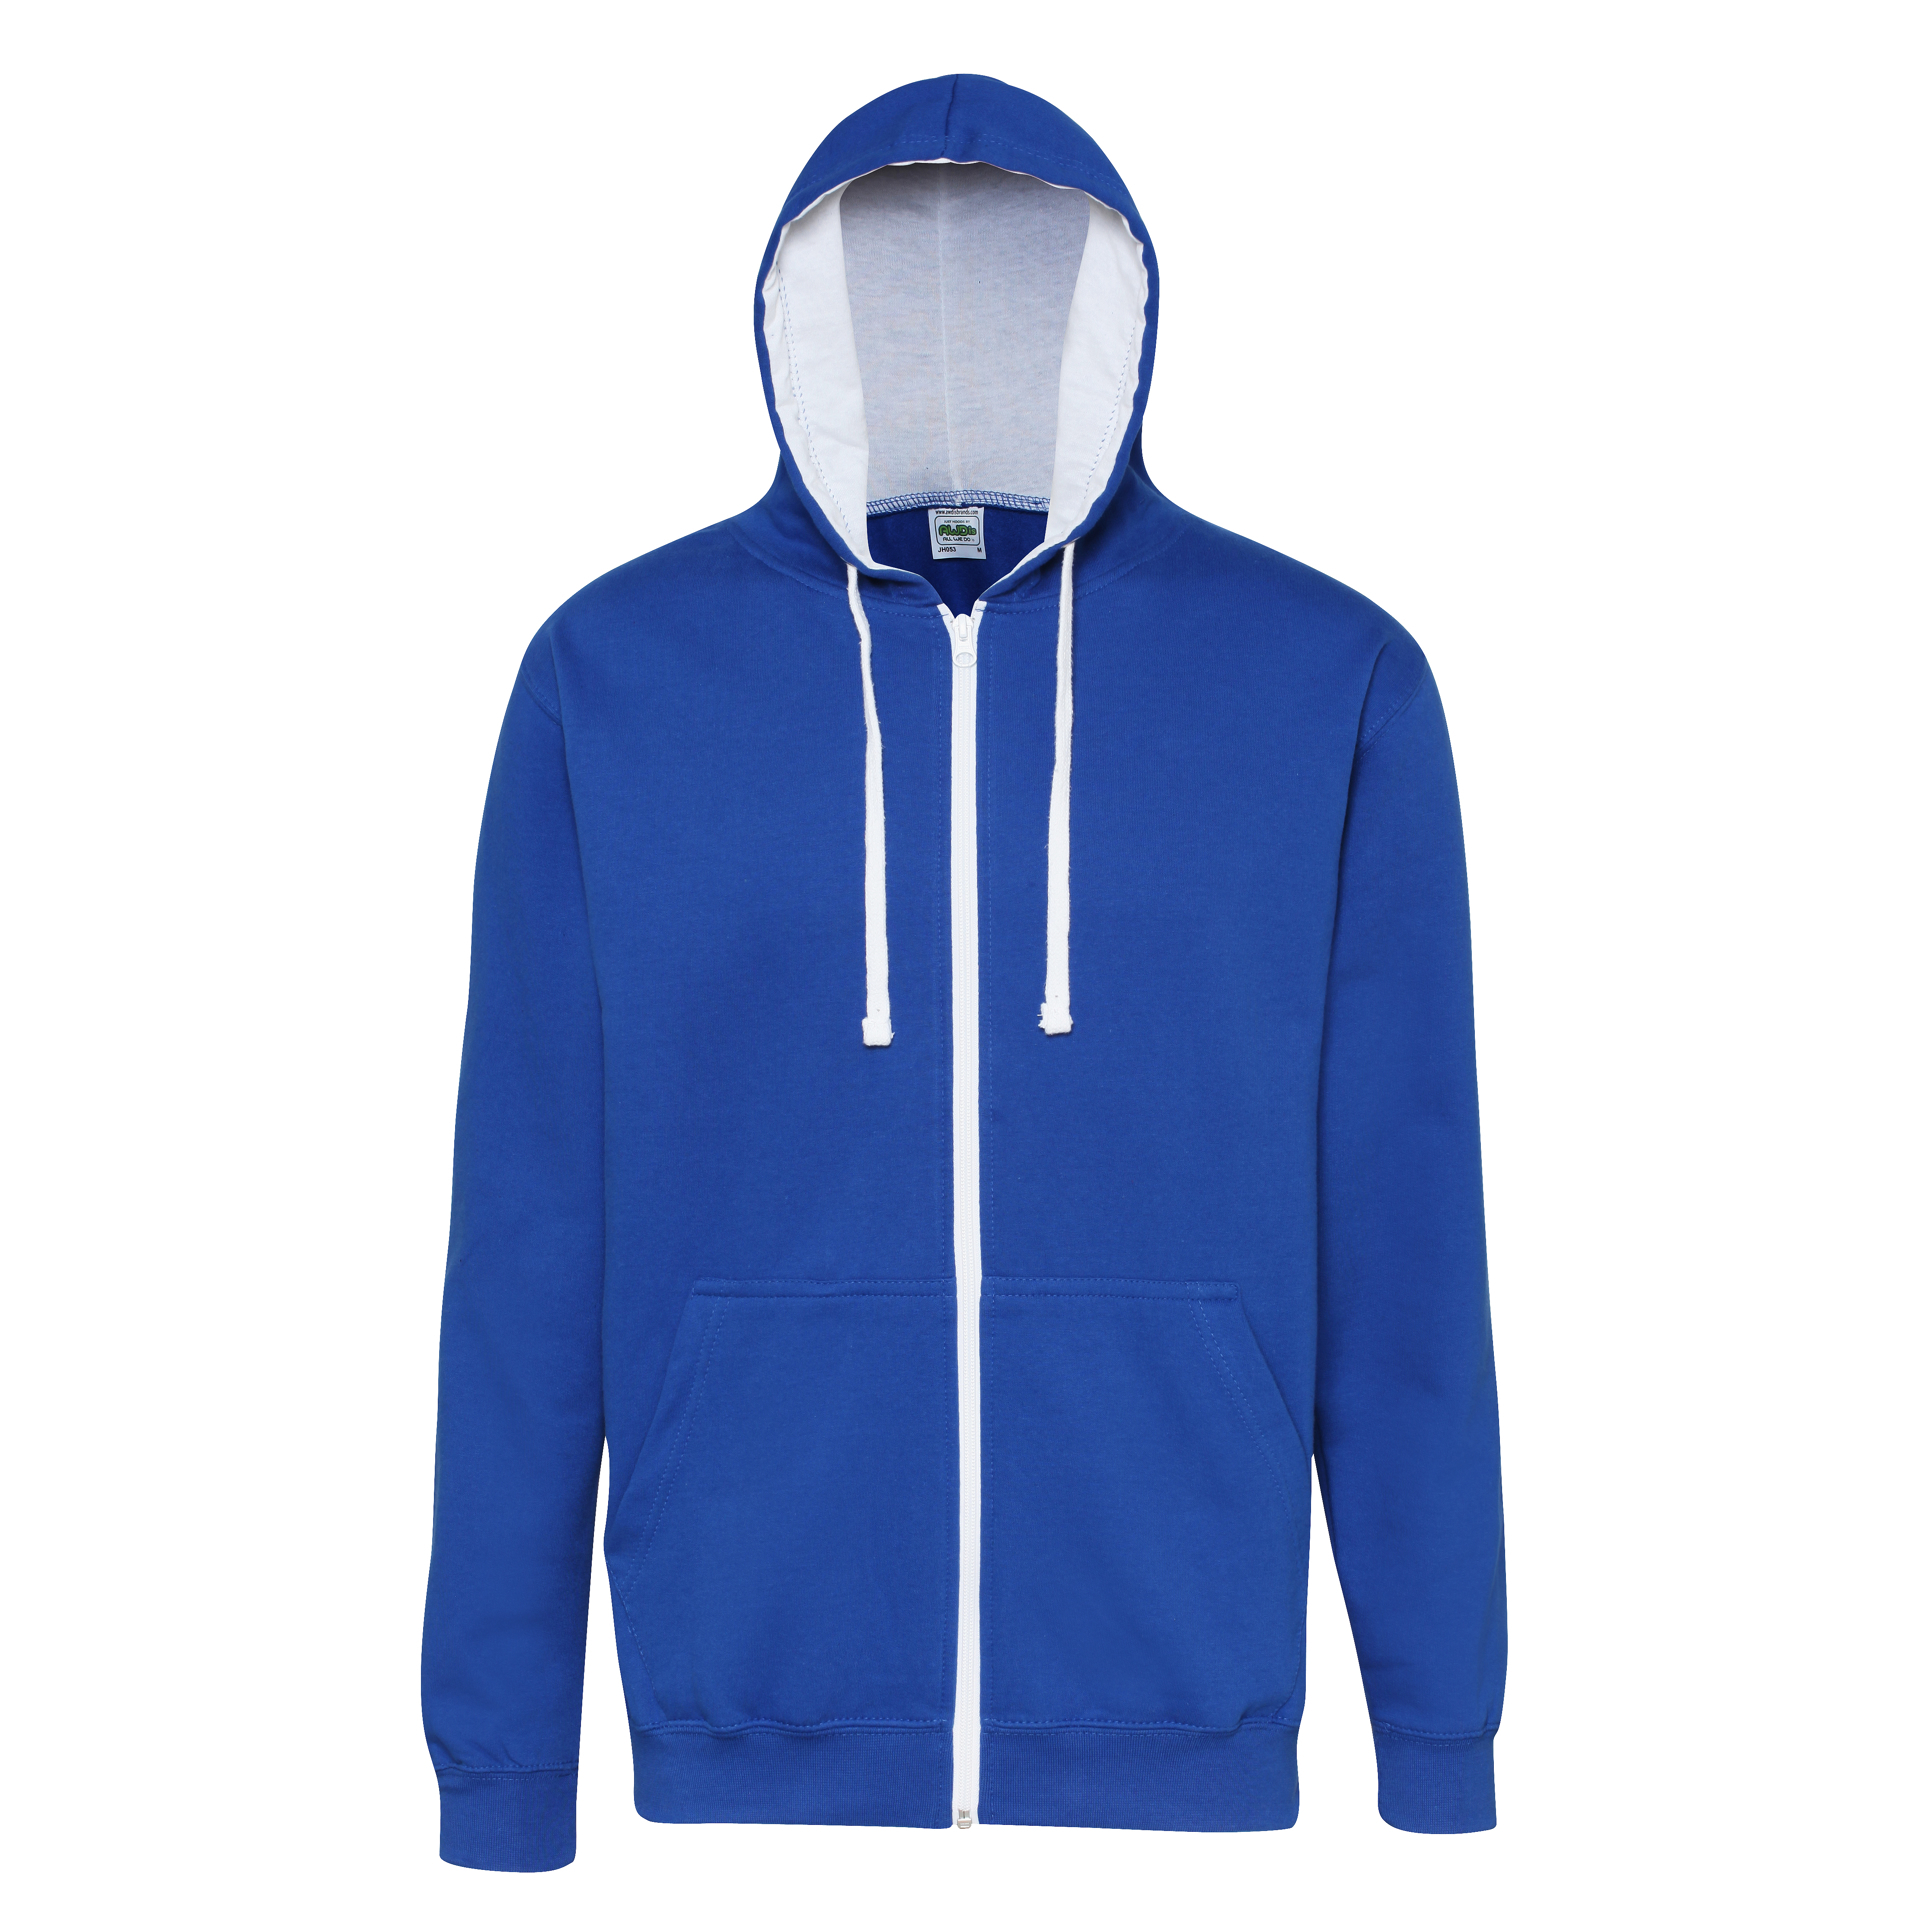 Men's Varsity Hoodie in blue with white details and lining